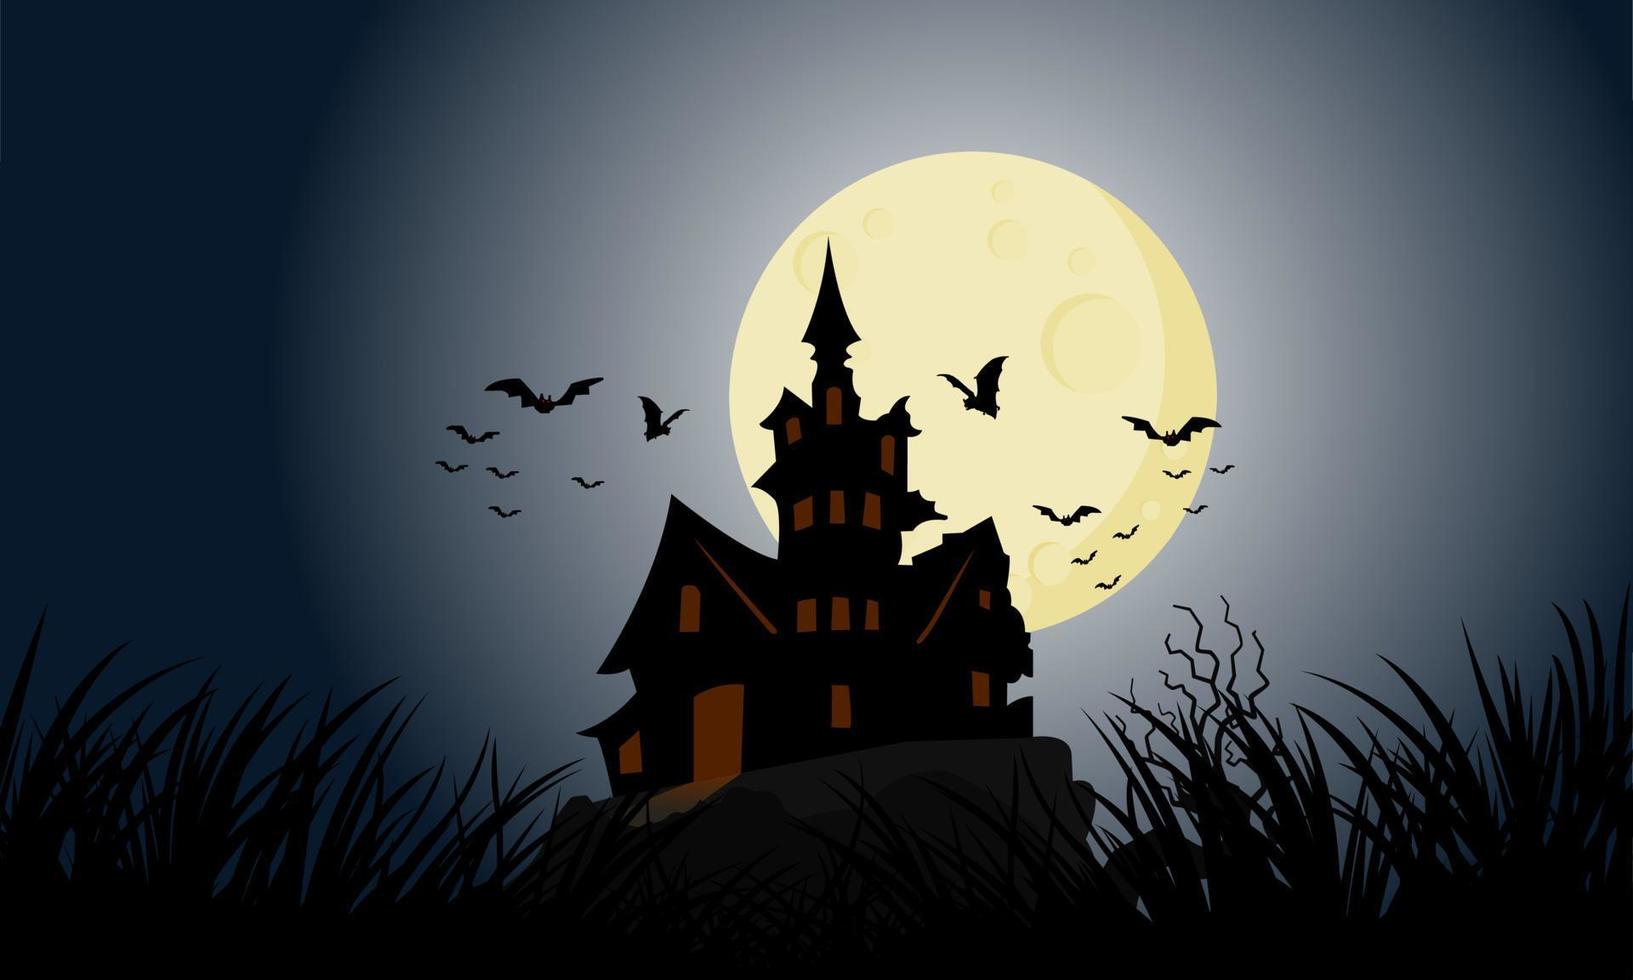 Terrifying dark castle on Halloween full moon night. Swarms of bats fly around Dracula's castle towering over the mountains. vector